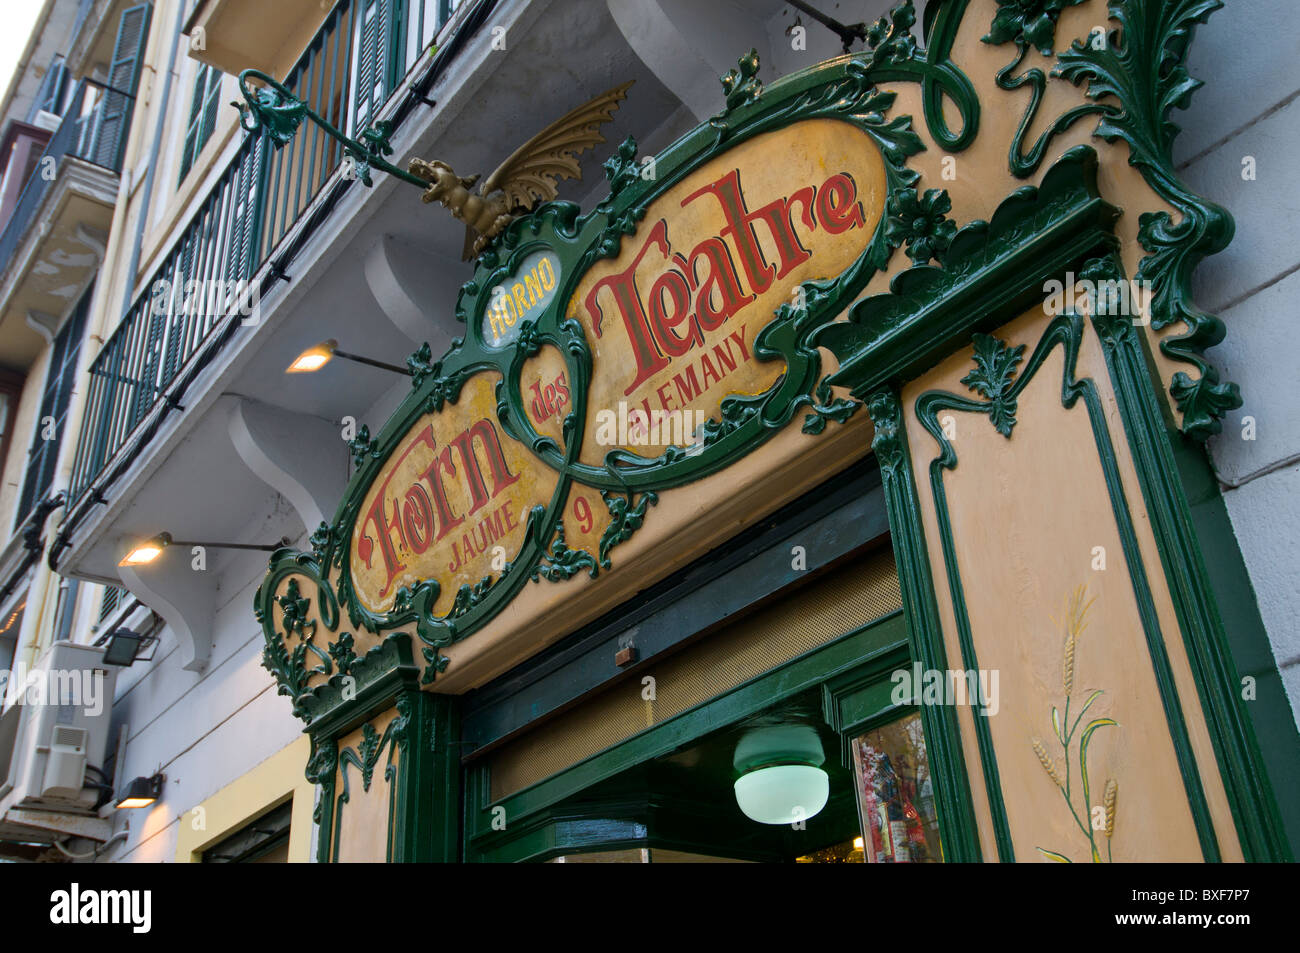 Palma Bar Café Forn des Teatre Renowned Historic traditional style cafe bar and bakery in Palma de Mallorca Balearic Islands Spain Stock Photo